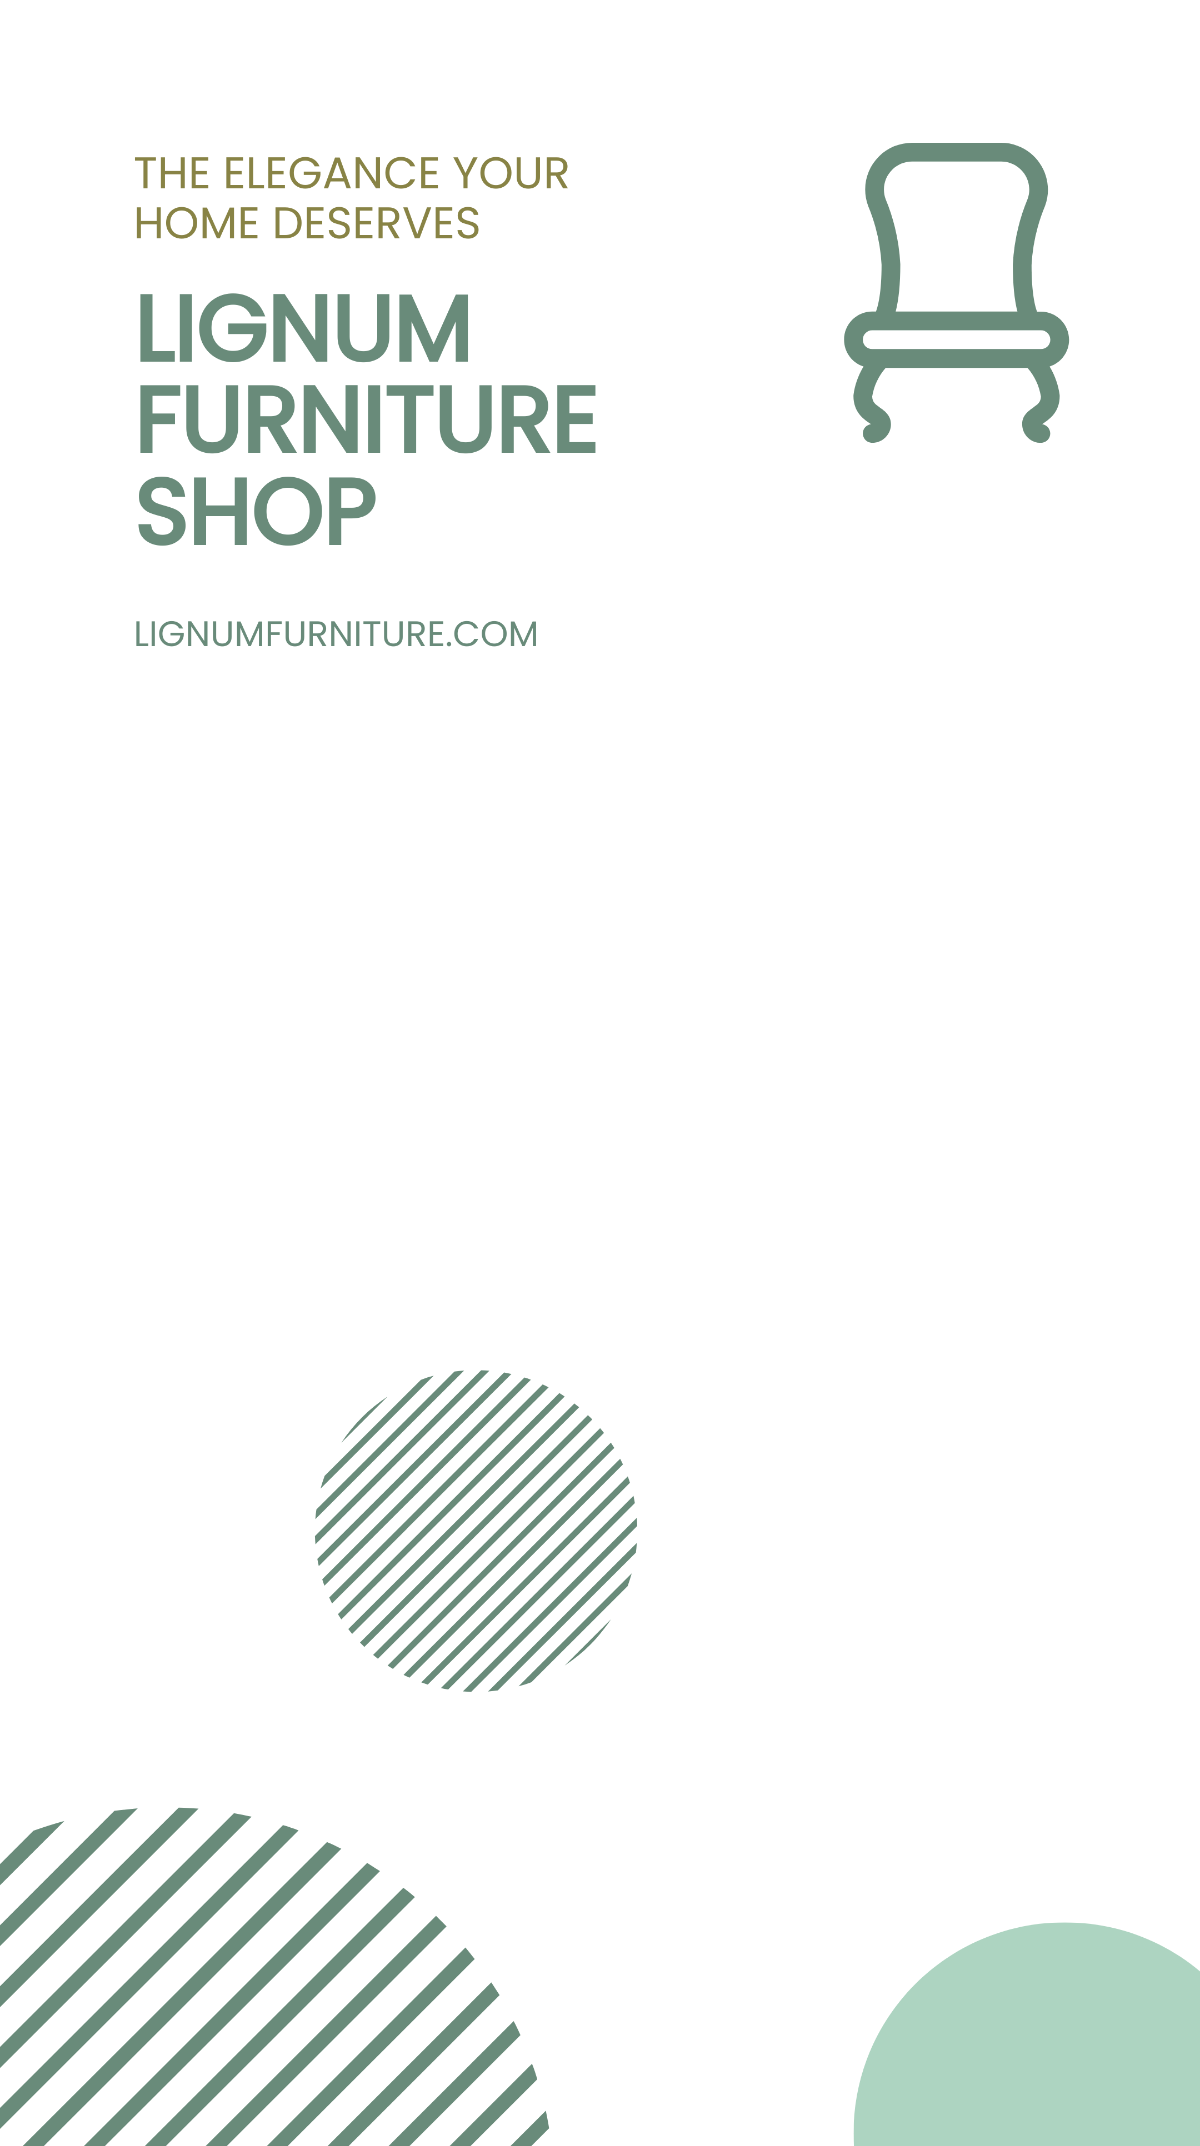 Furniture Shop Snapchat Geofilter Template